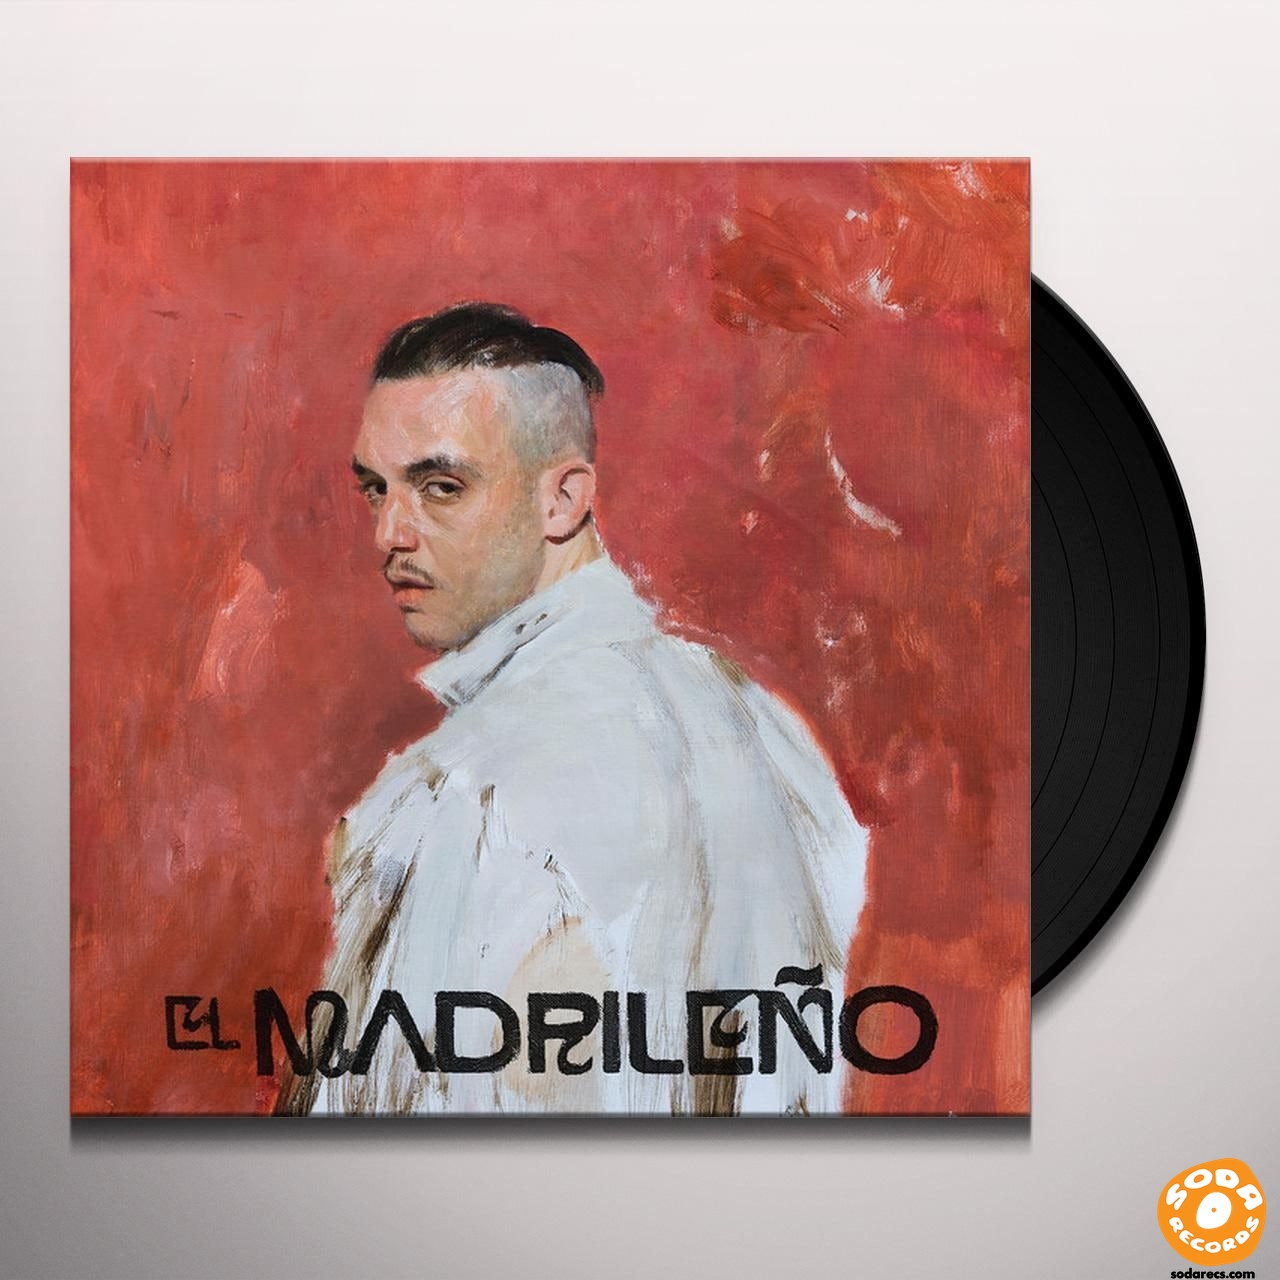 c. tangana - el madrileño lp 2021 - Buy LP vinyl records of Spanish Bands  since the 90s to present on todocoleccion